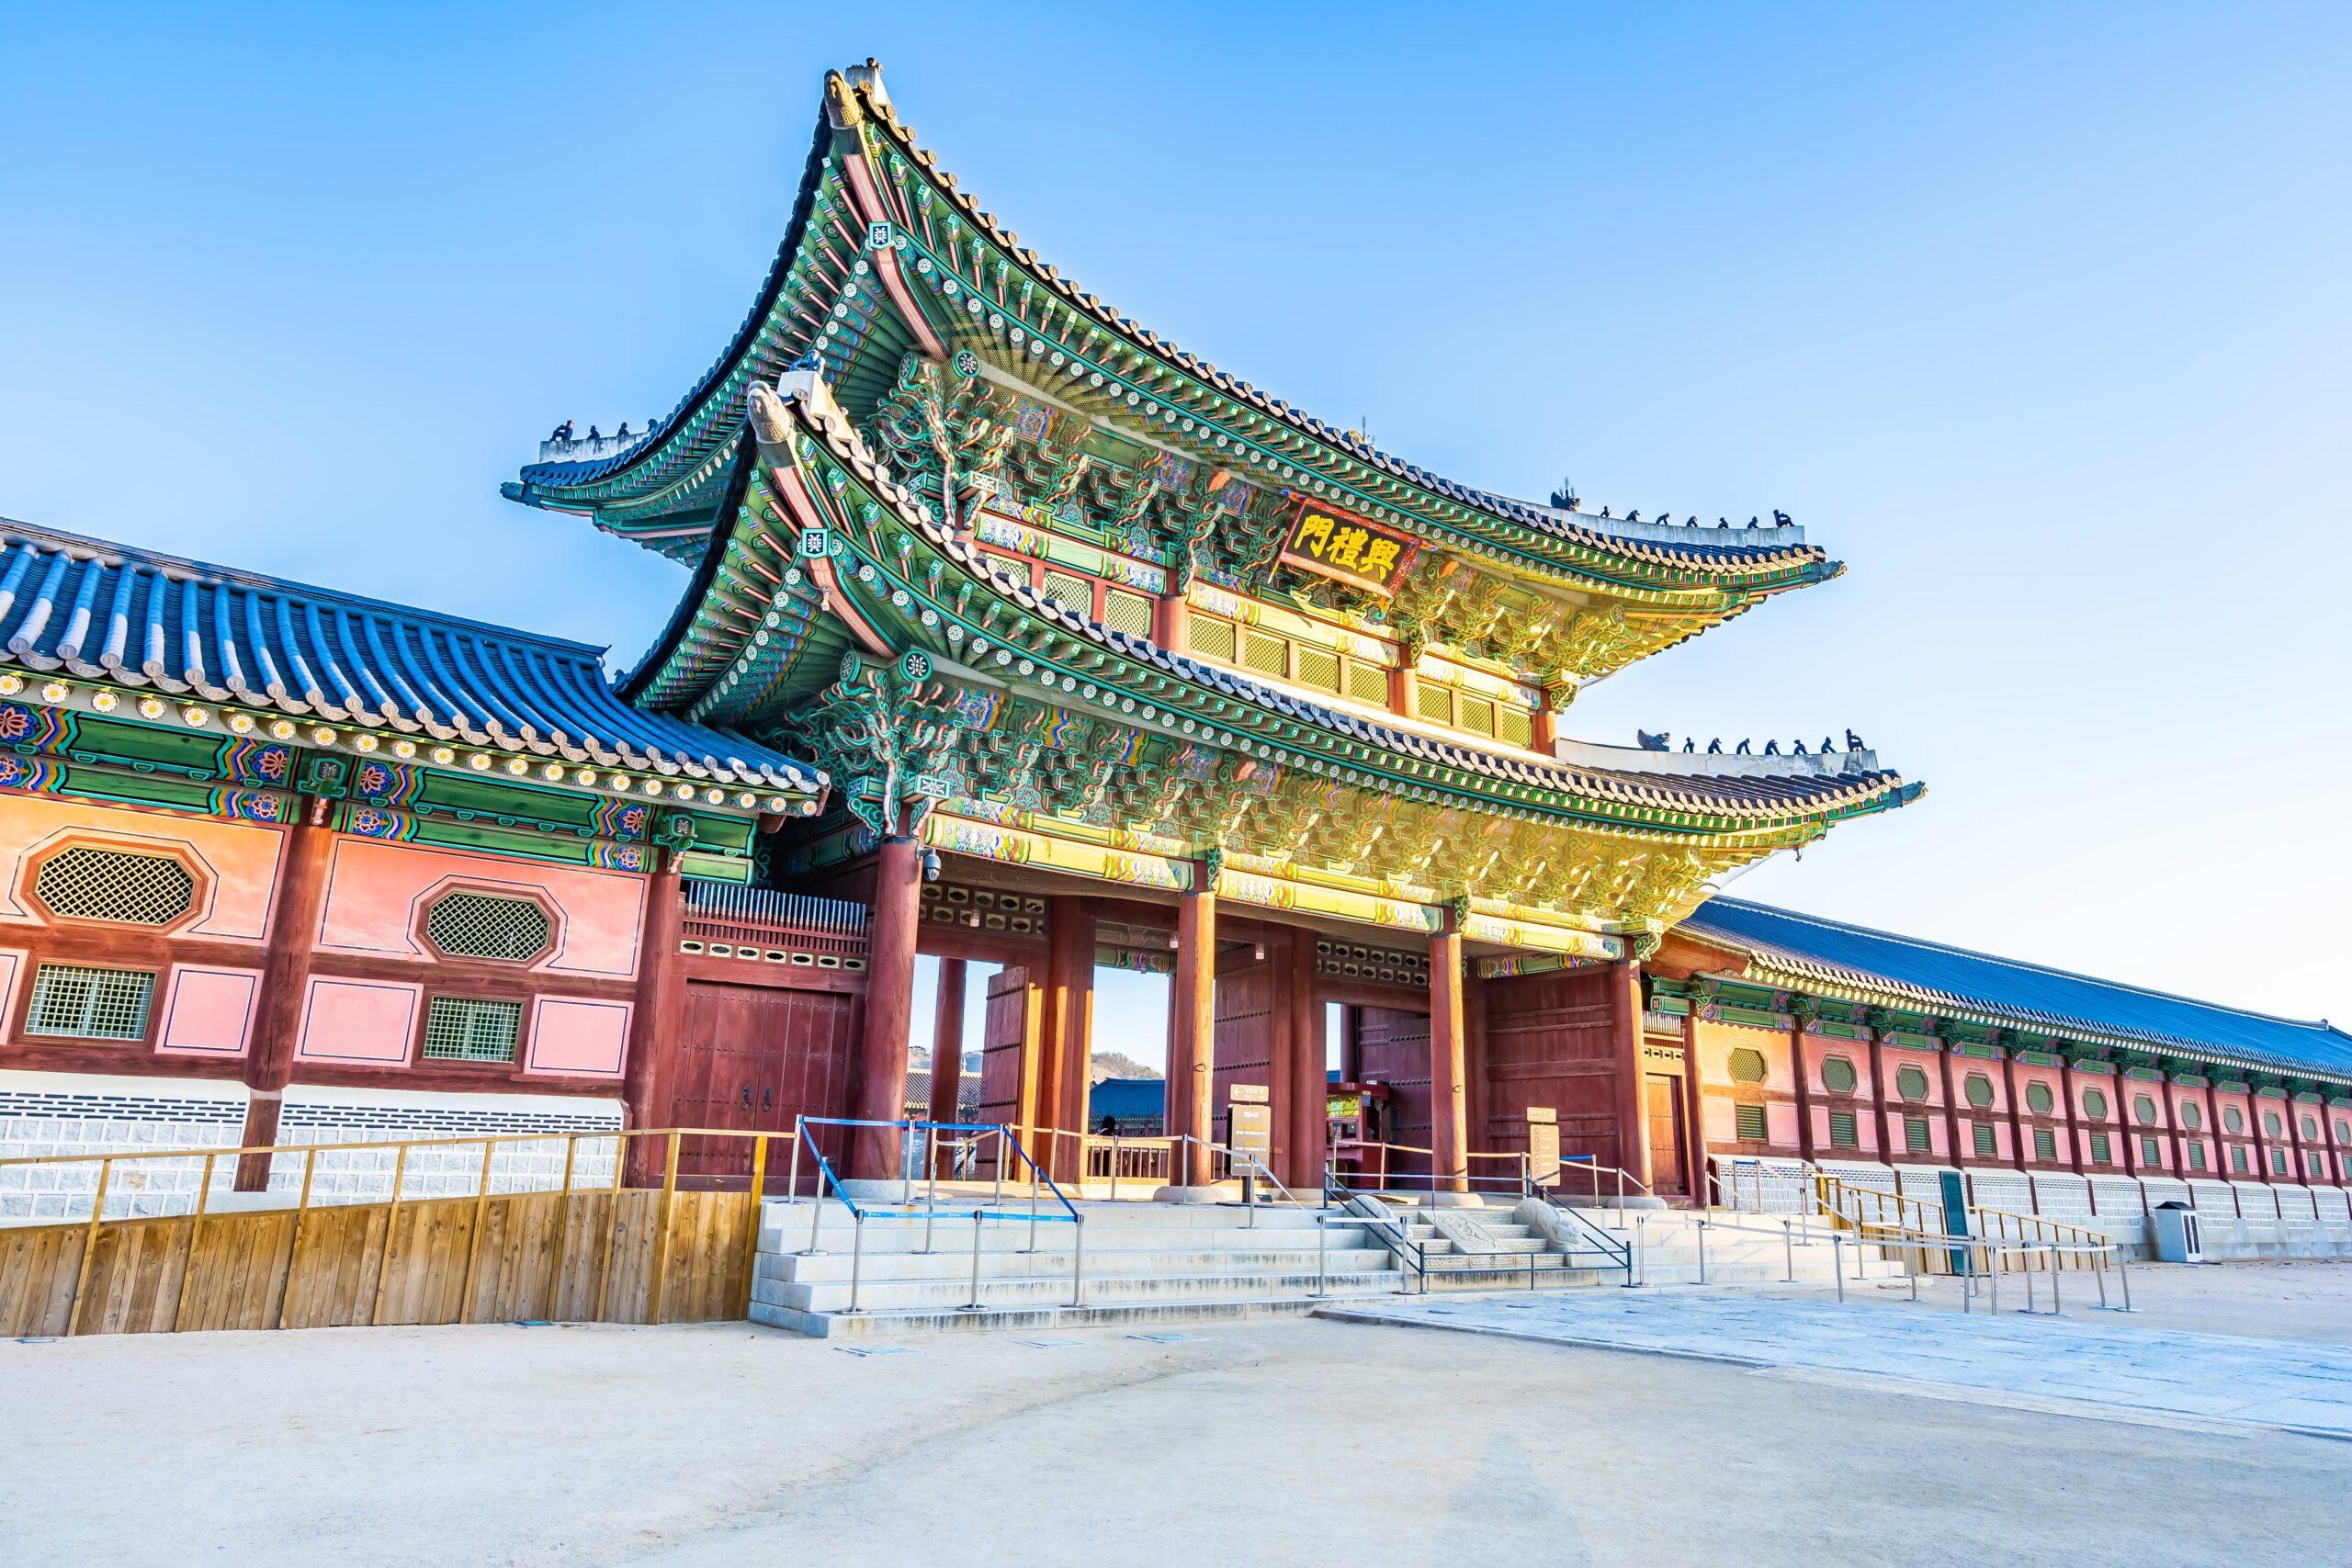 Image of a Korean Palace to illustrate the importance of learning Korean for business